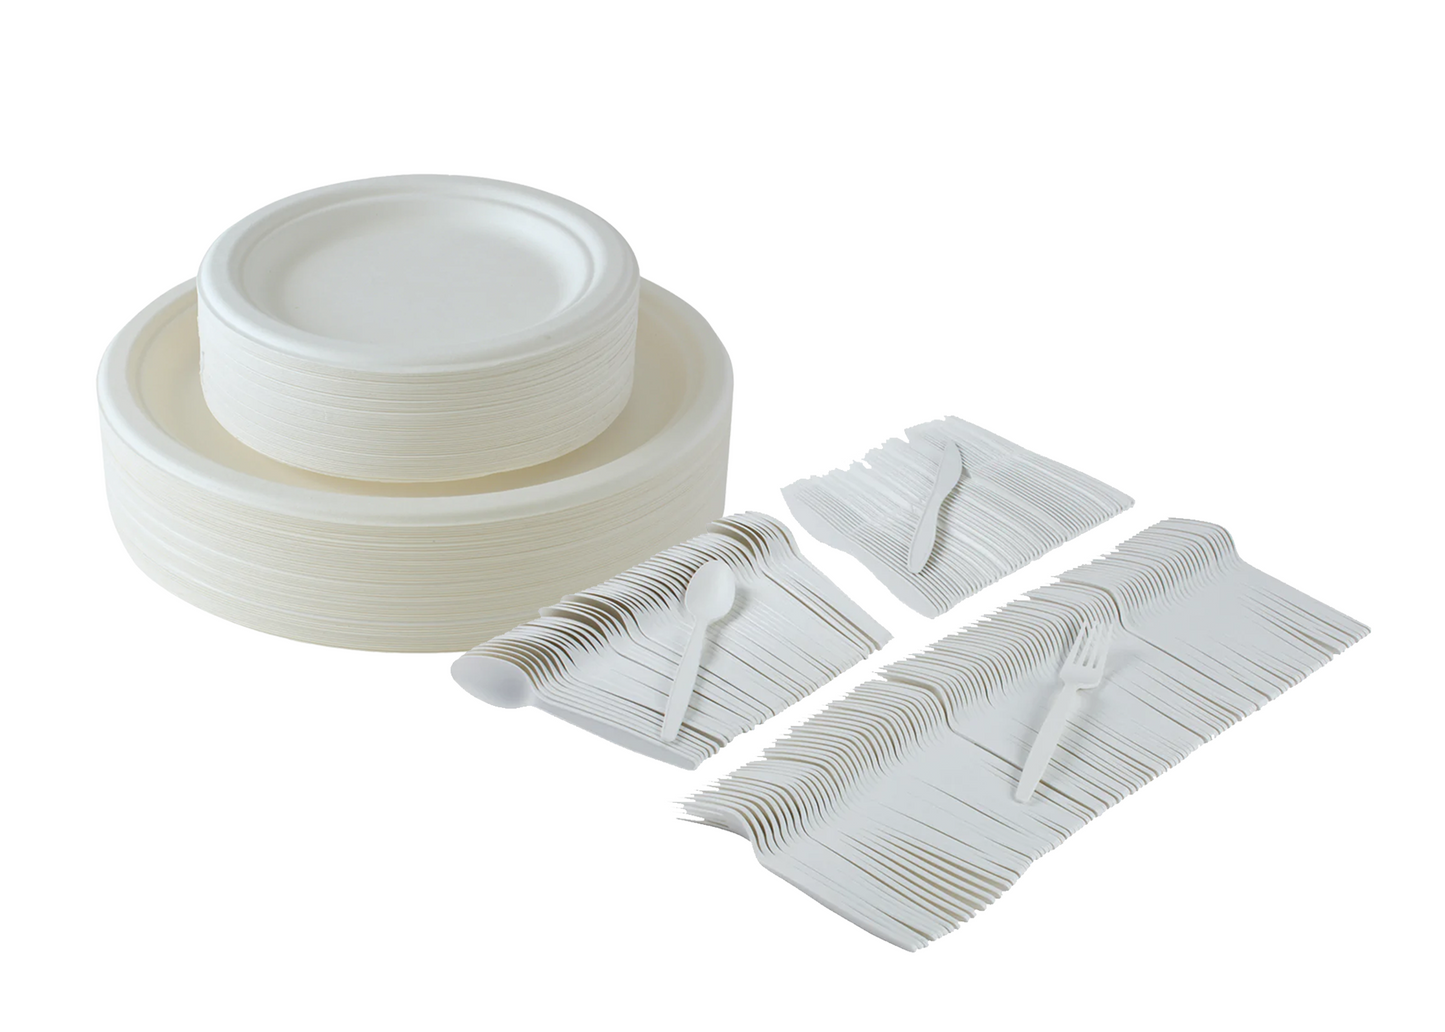 300-piece Compostable eco-friendly dinnerware set for 50 guests. Includes: 100 white round plates & 200 utensils